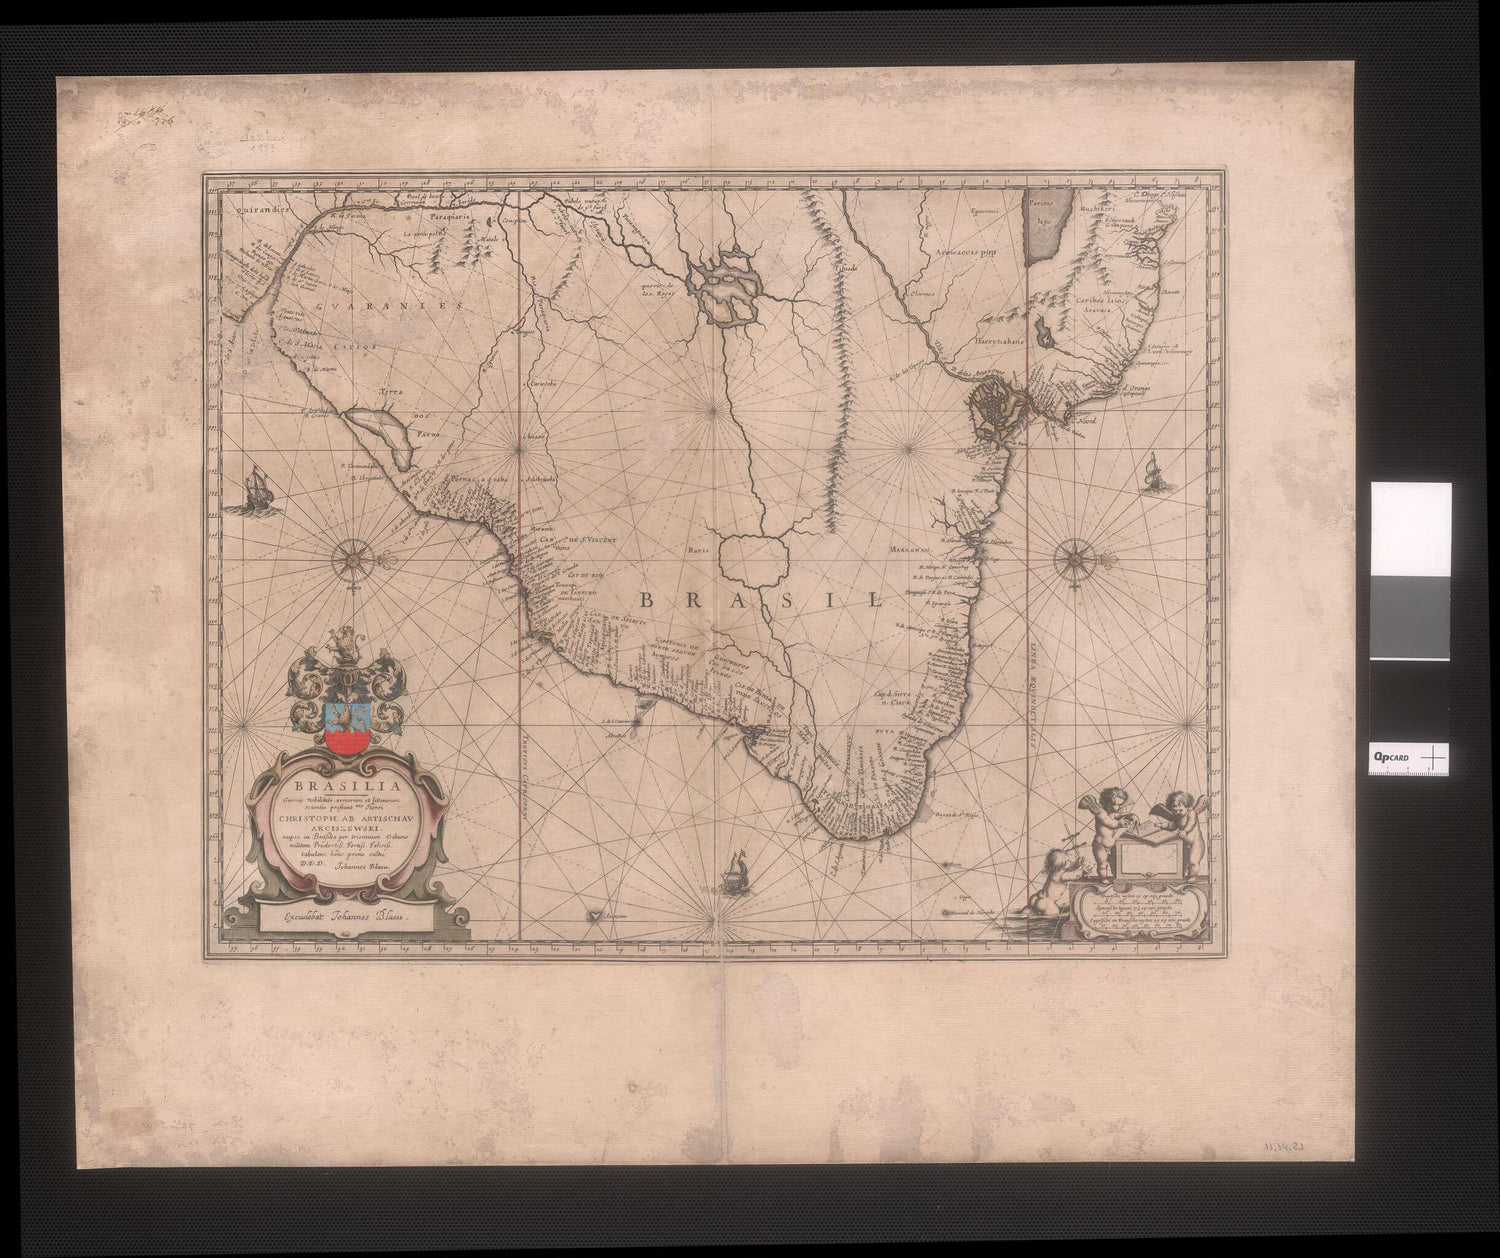 This old map of Brazil: of the Noble Class, of Loves, and of Letters.... (Brasilia: Front Generis Nobilitate Armerum Et Litterarum) from 1640 was created by Joan Blaeu in 1640